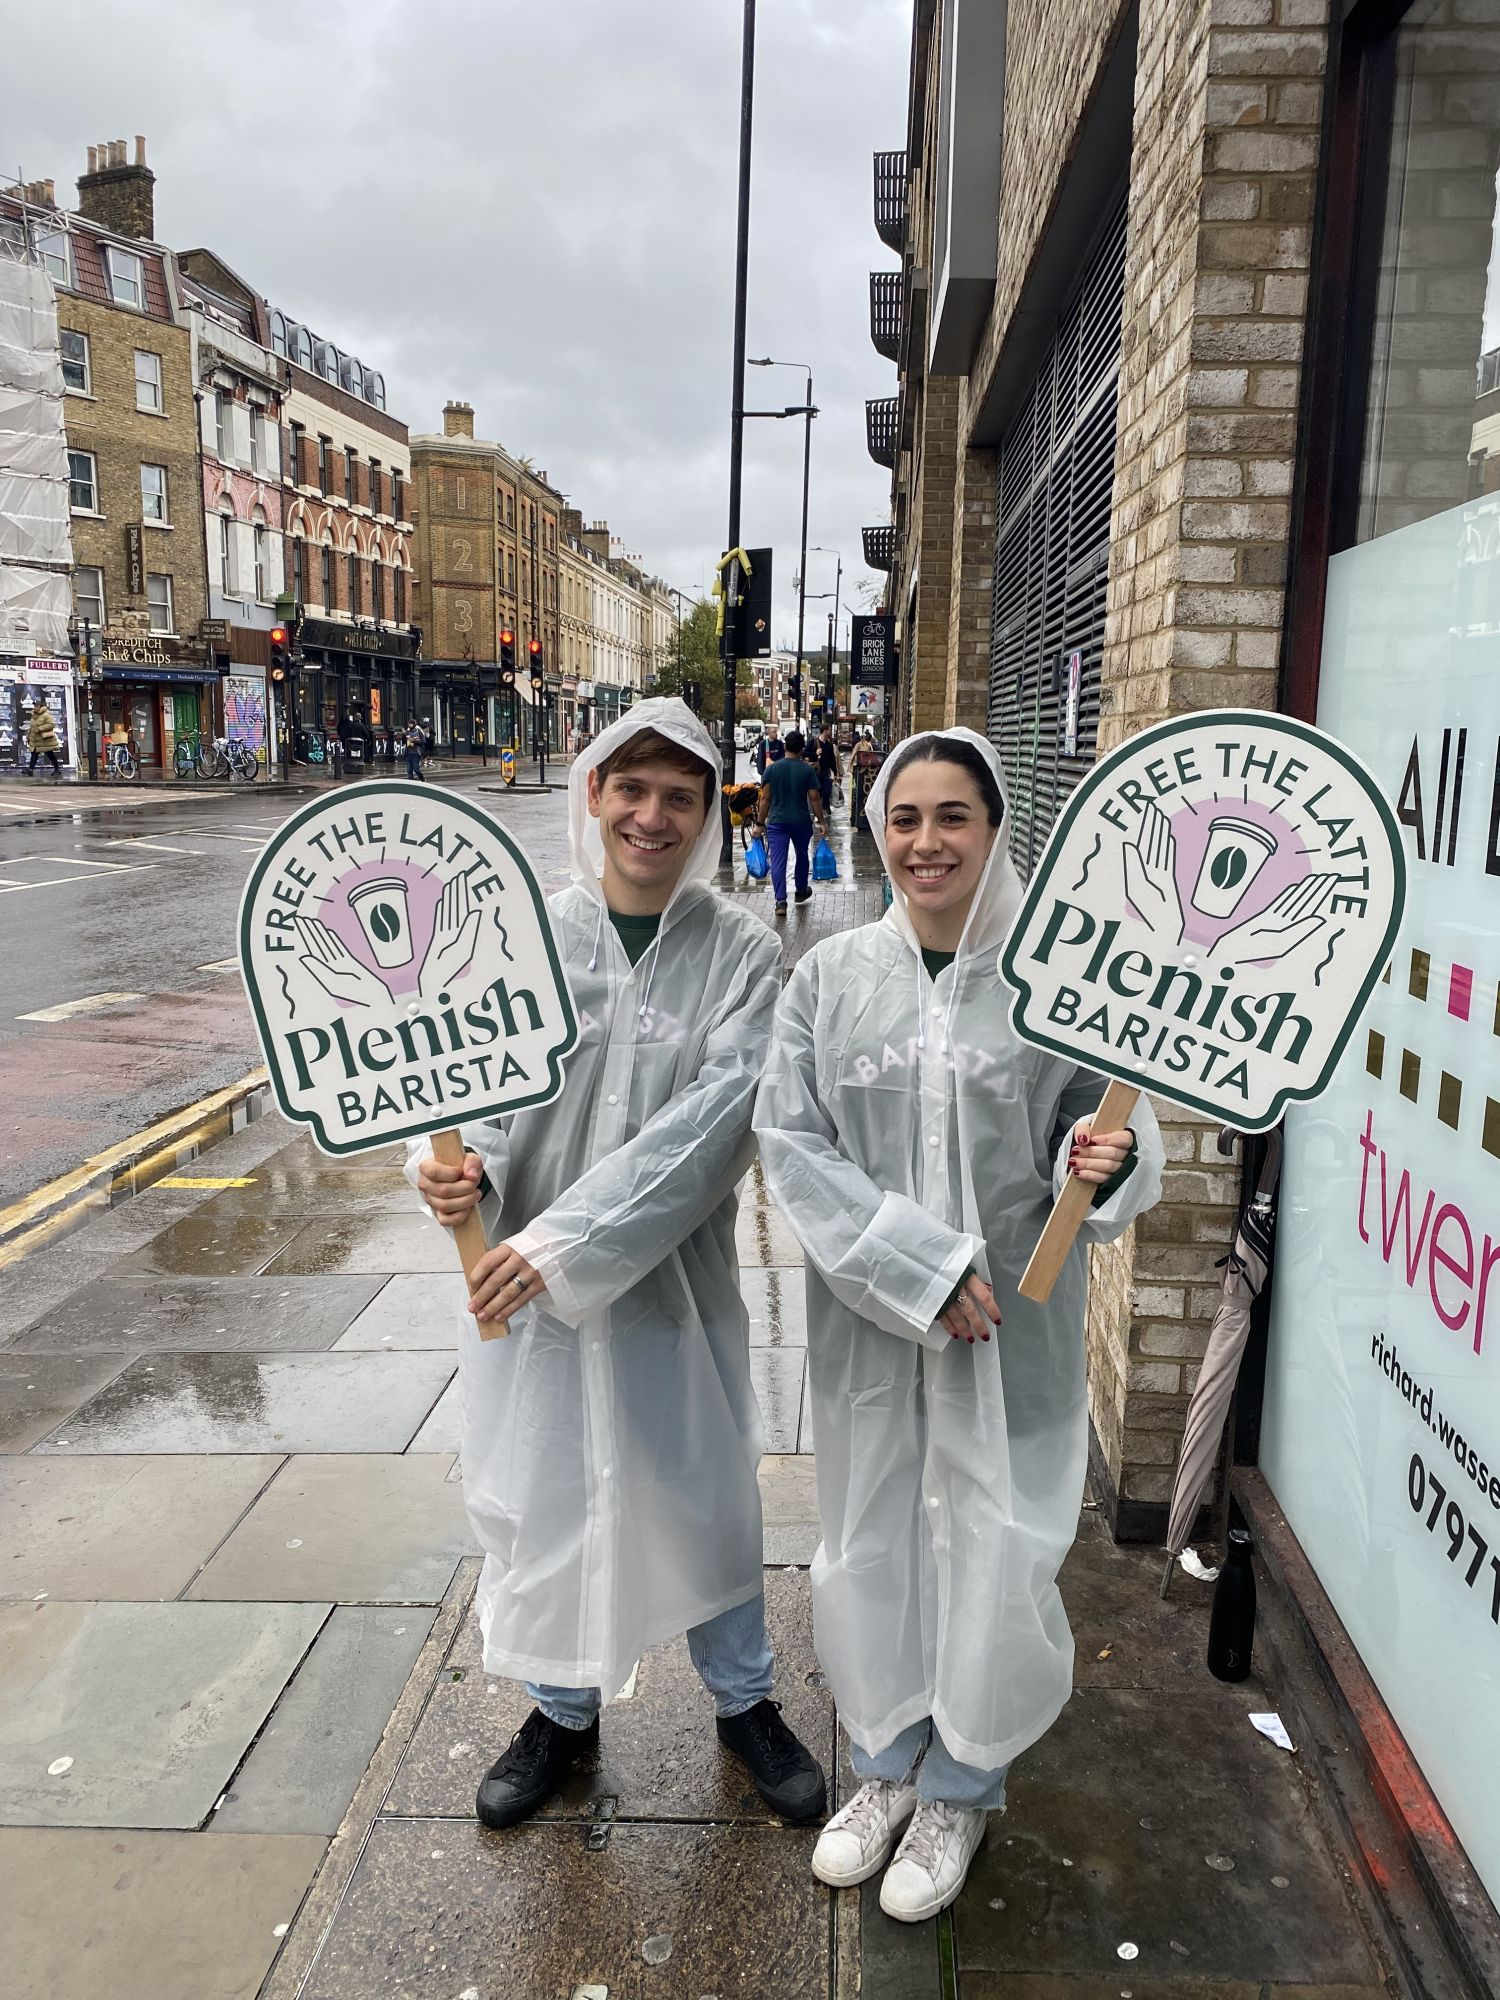 @ staff in clear raincoats holding signs that read Plenish at Hel's pop-up